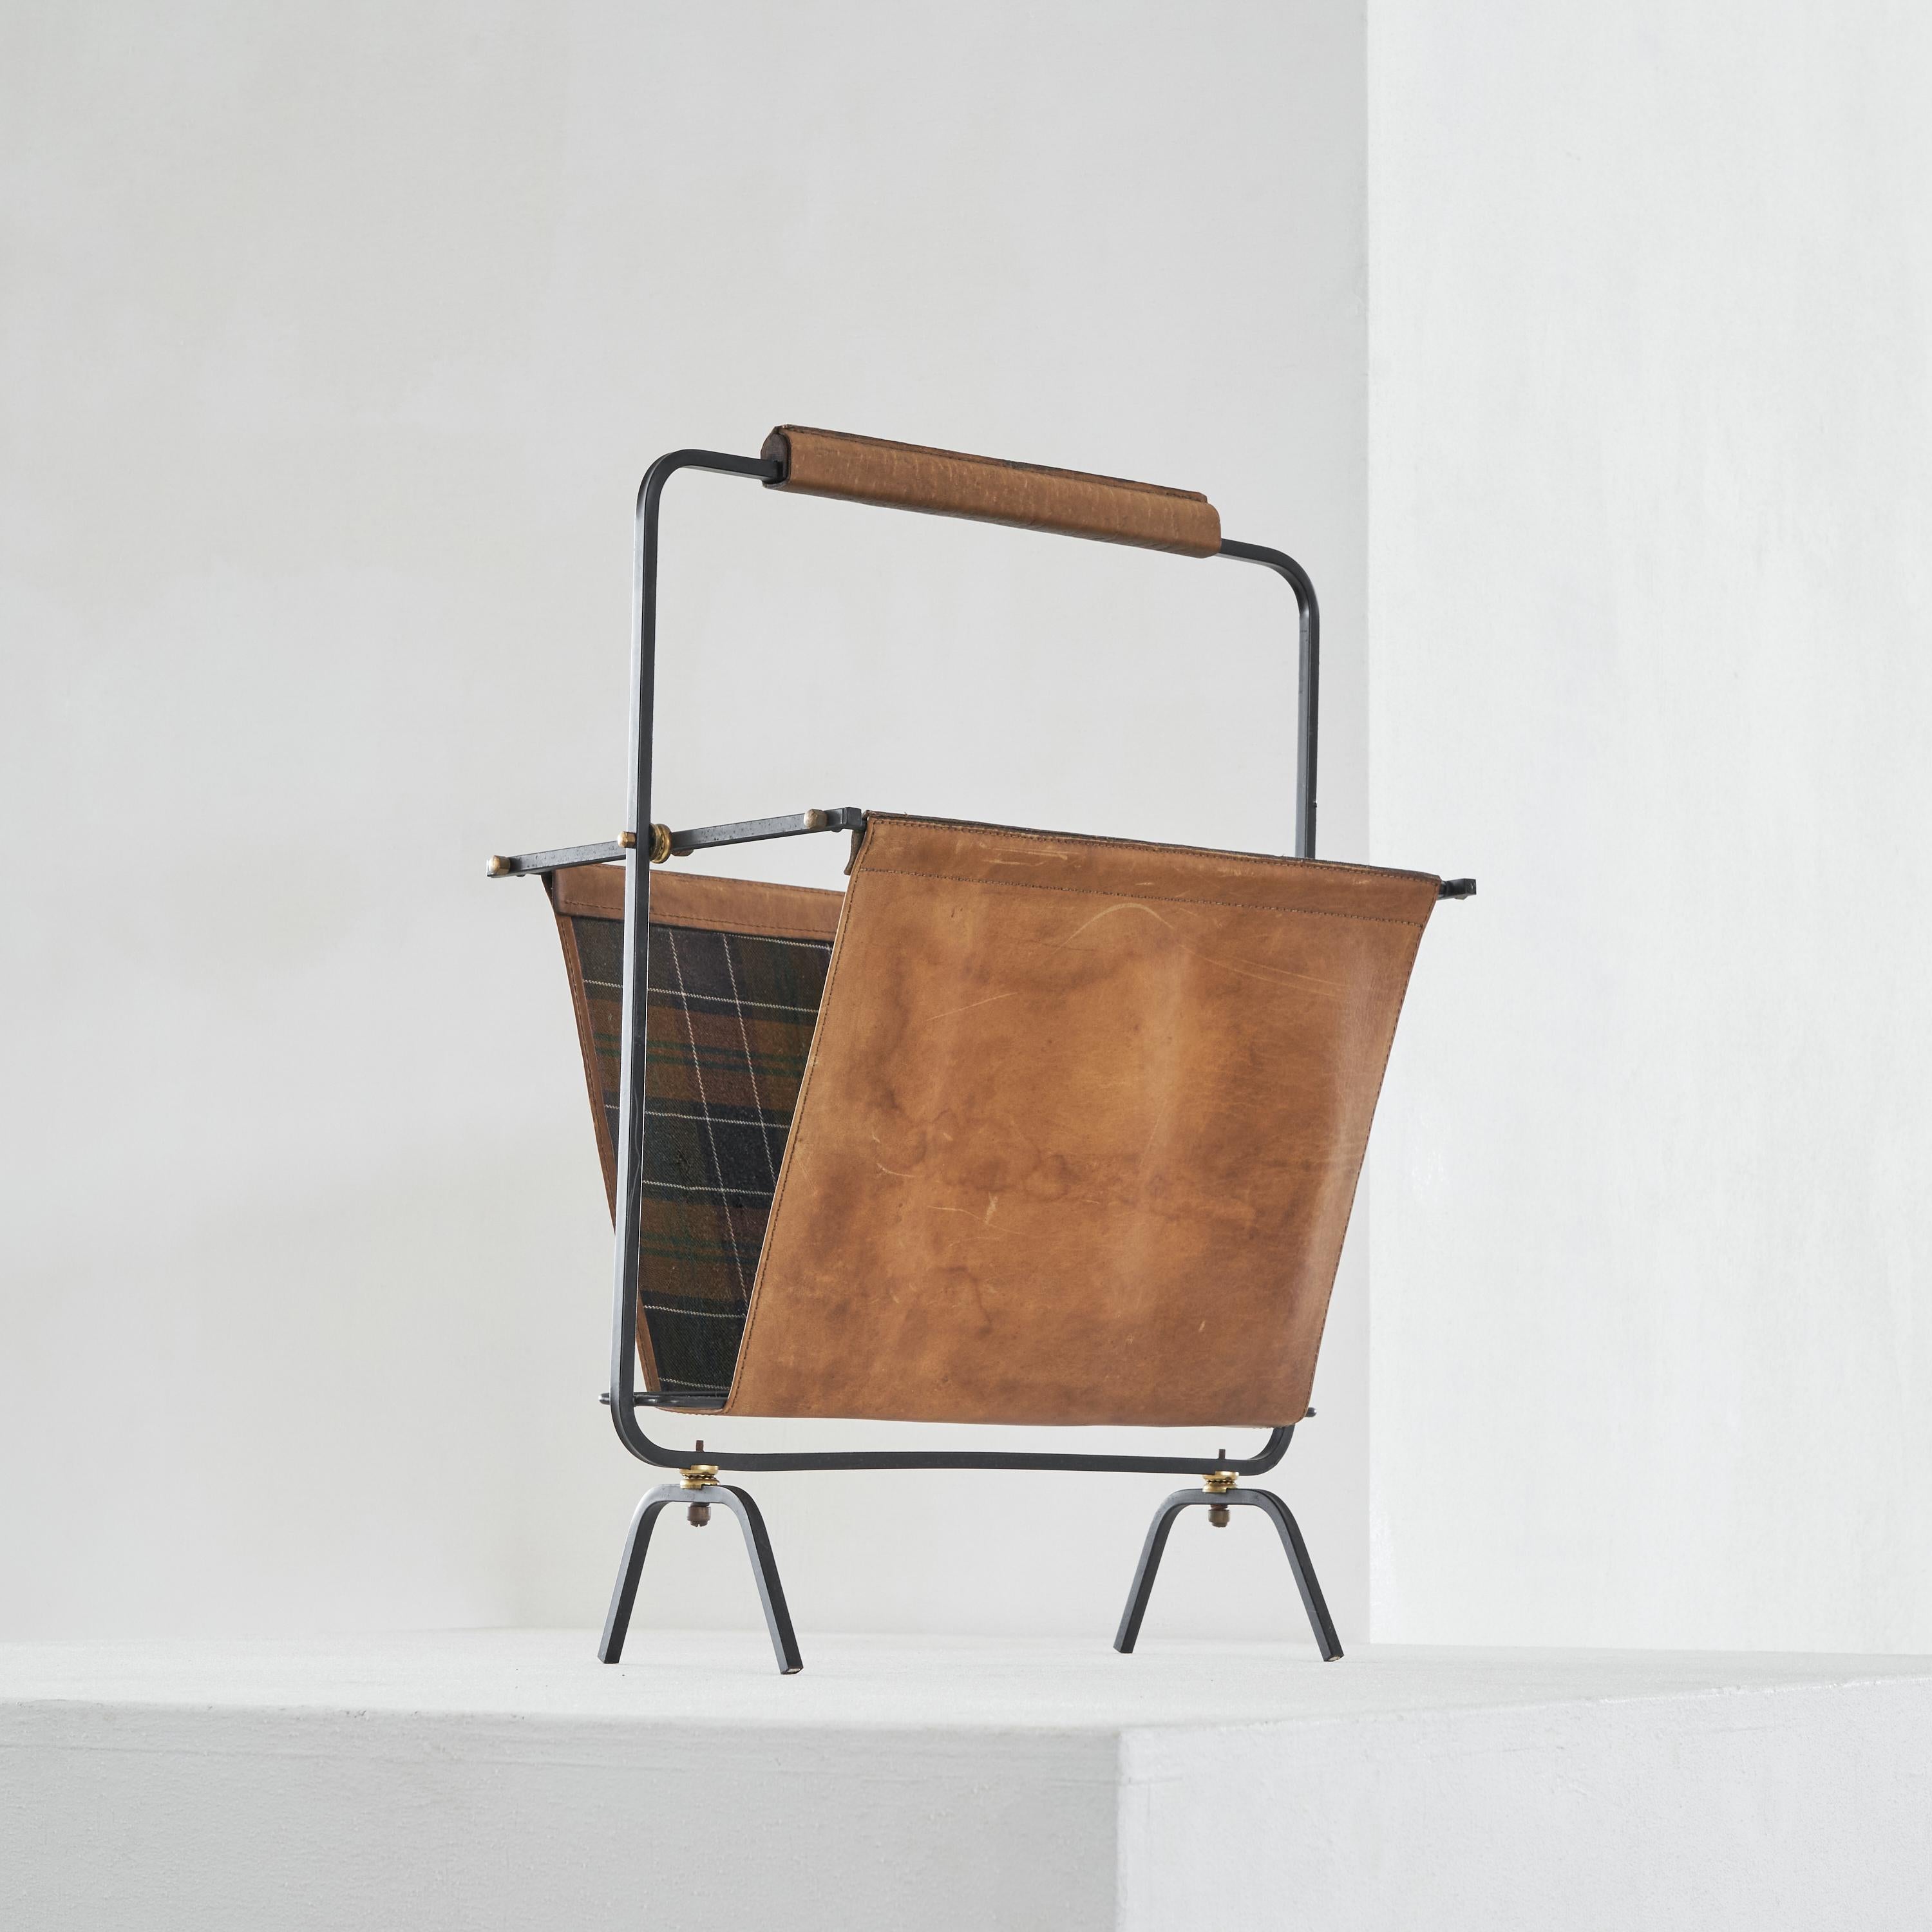 Mid-century magazine rack in patinated cognac leather, brass and metal 1950s.

This mid-century magazine rack in cognac leather, metal and brass is a wonderful addition to any stylish interior. Clean lines, luxurious materials and a rich